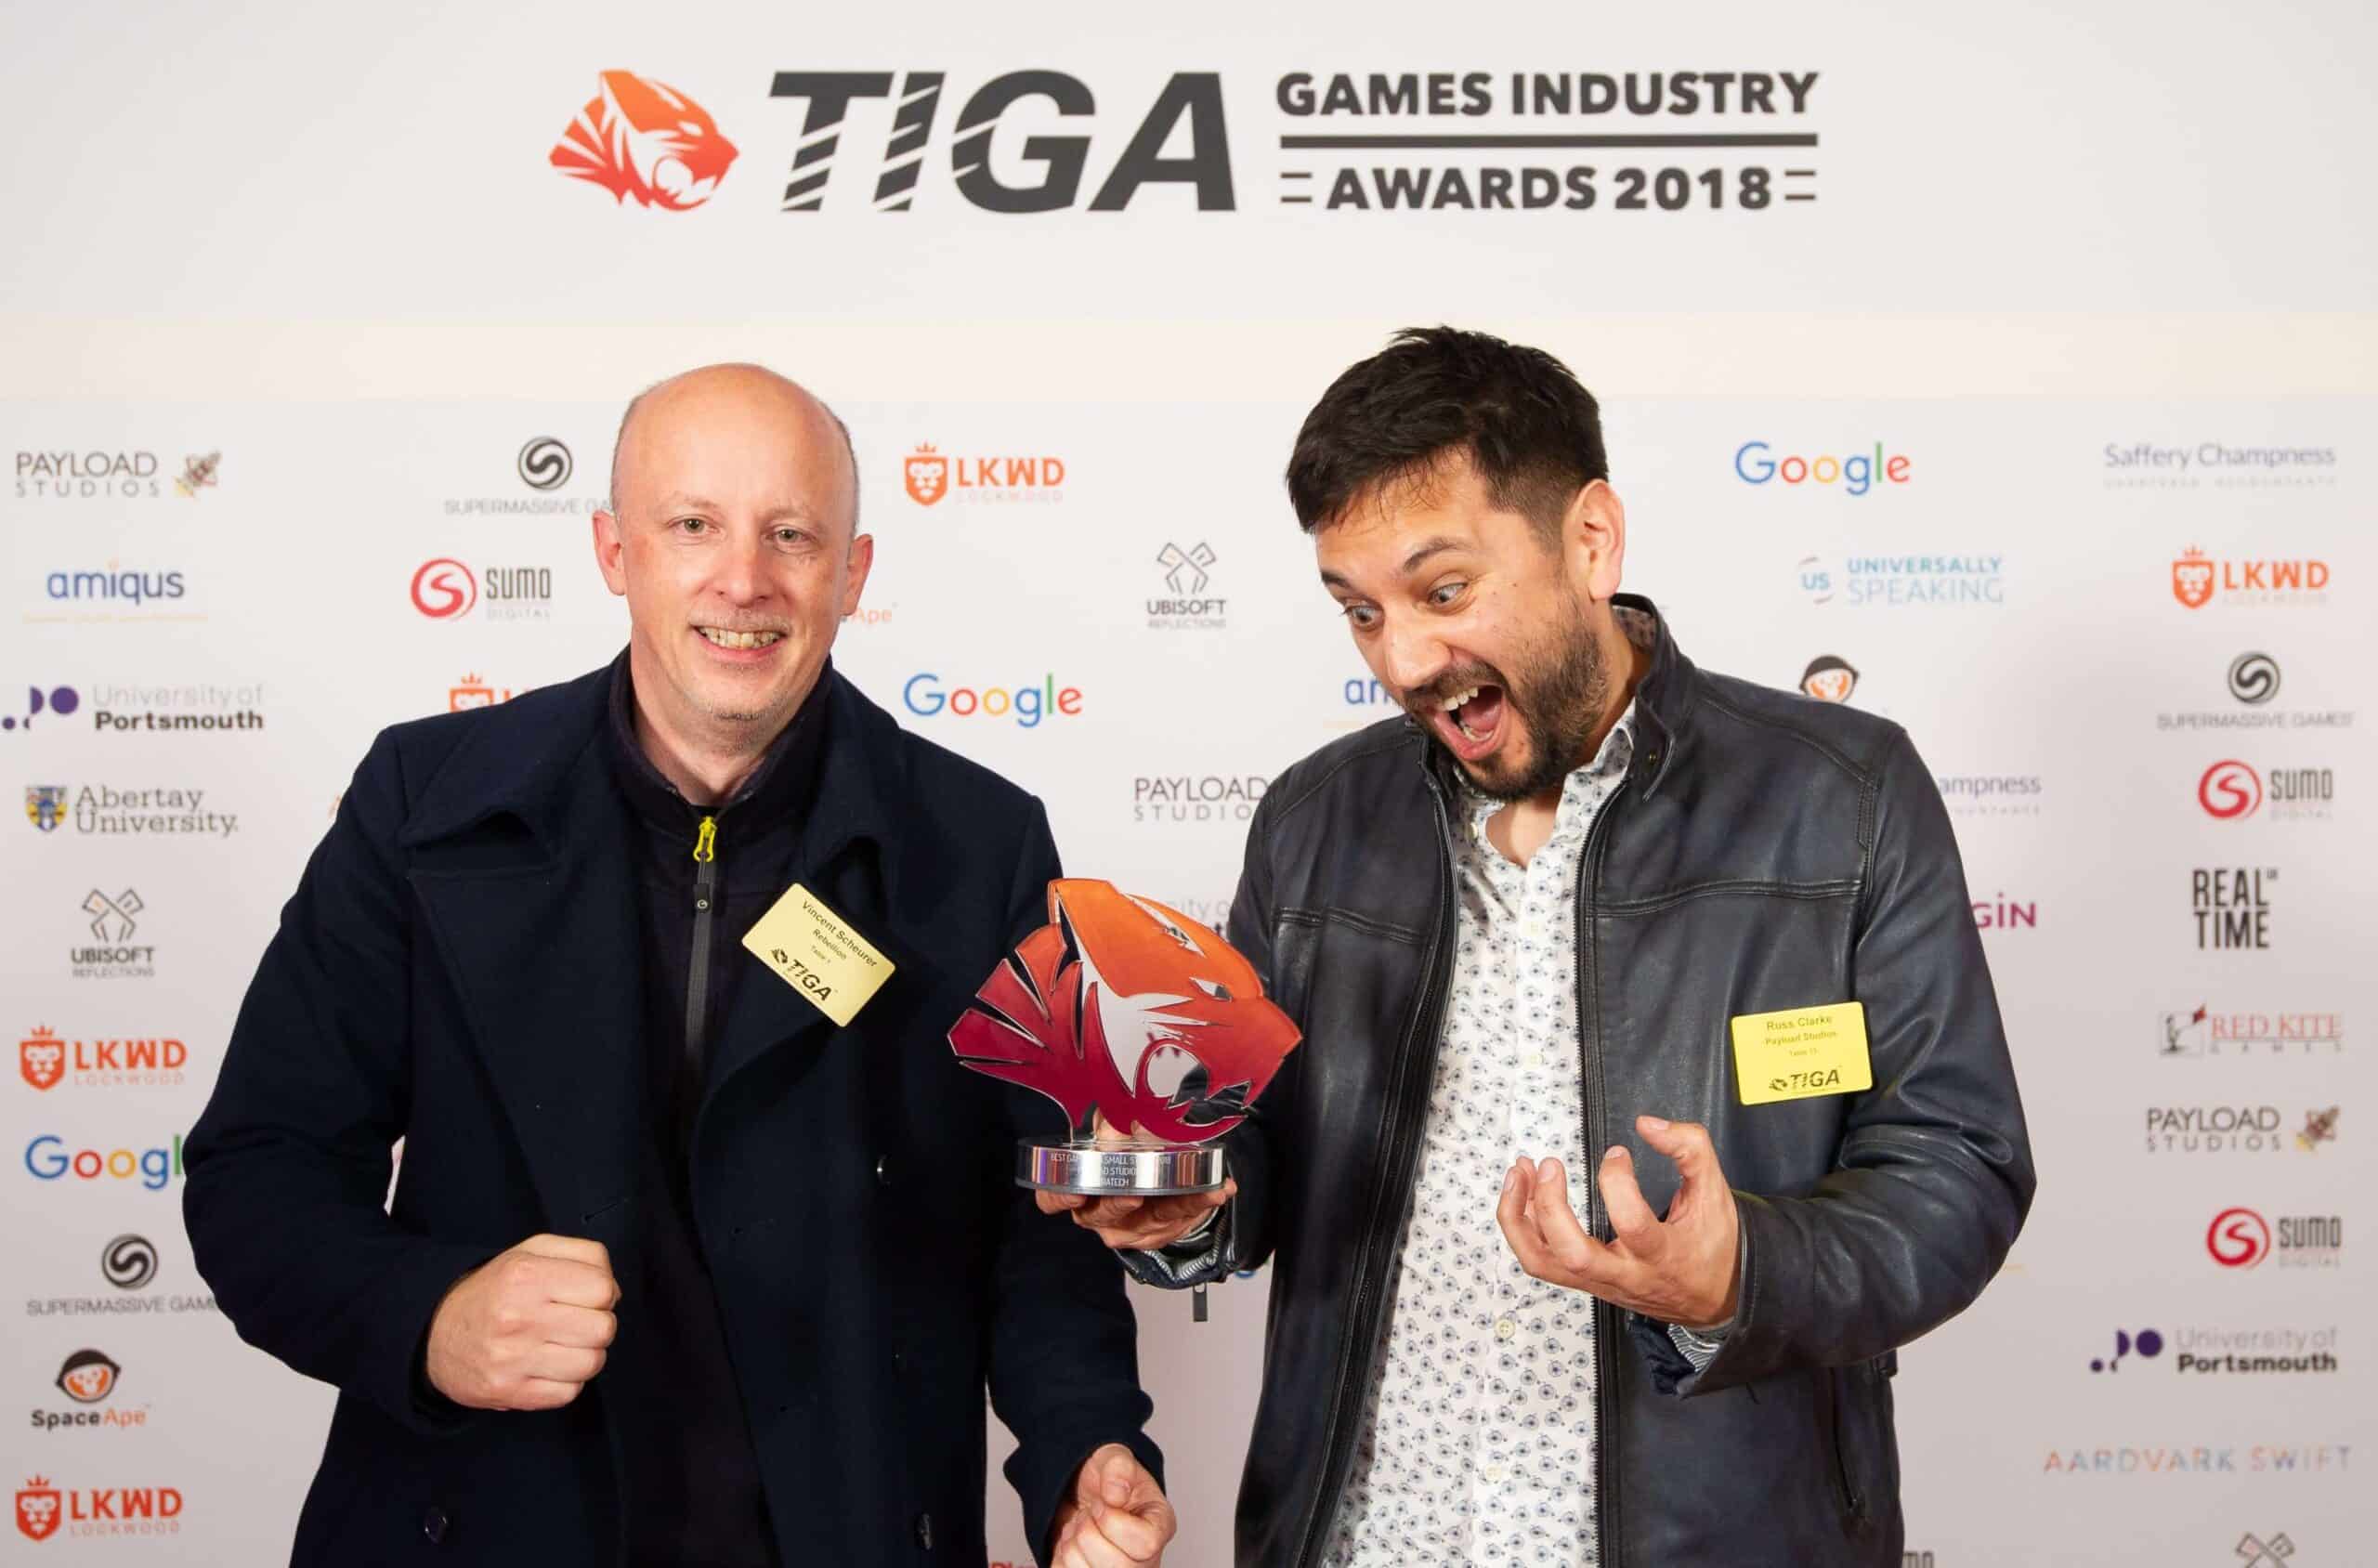 The TIGA Games Industry Award Winners 2022 are revealed! - TIGA